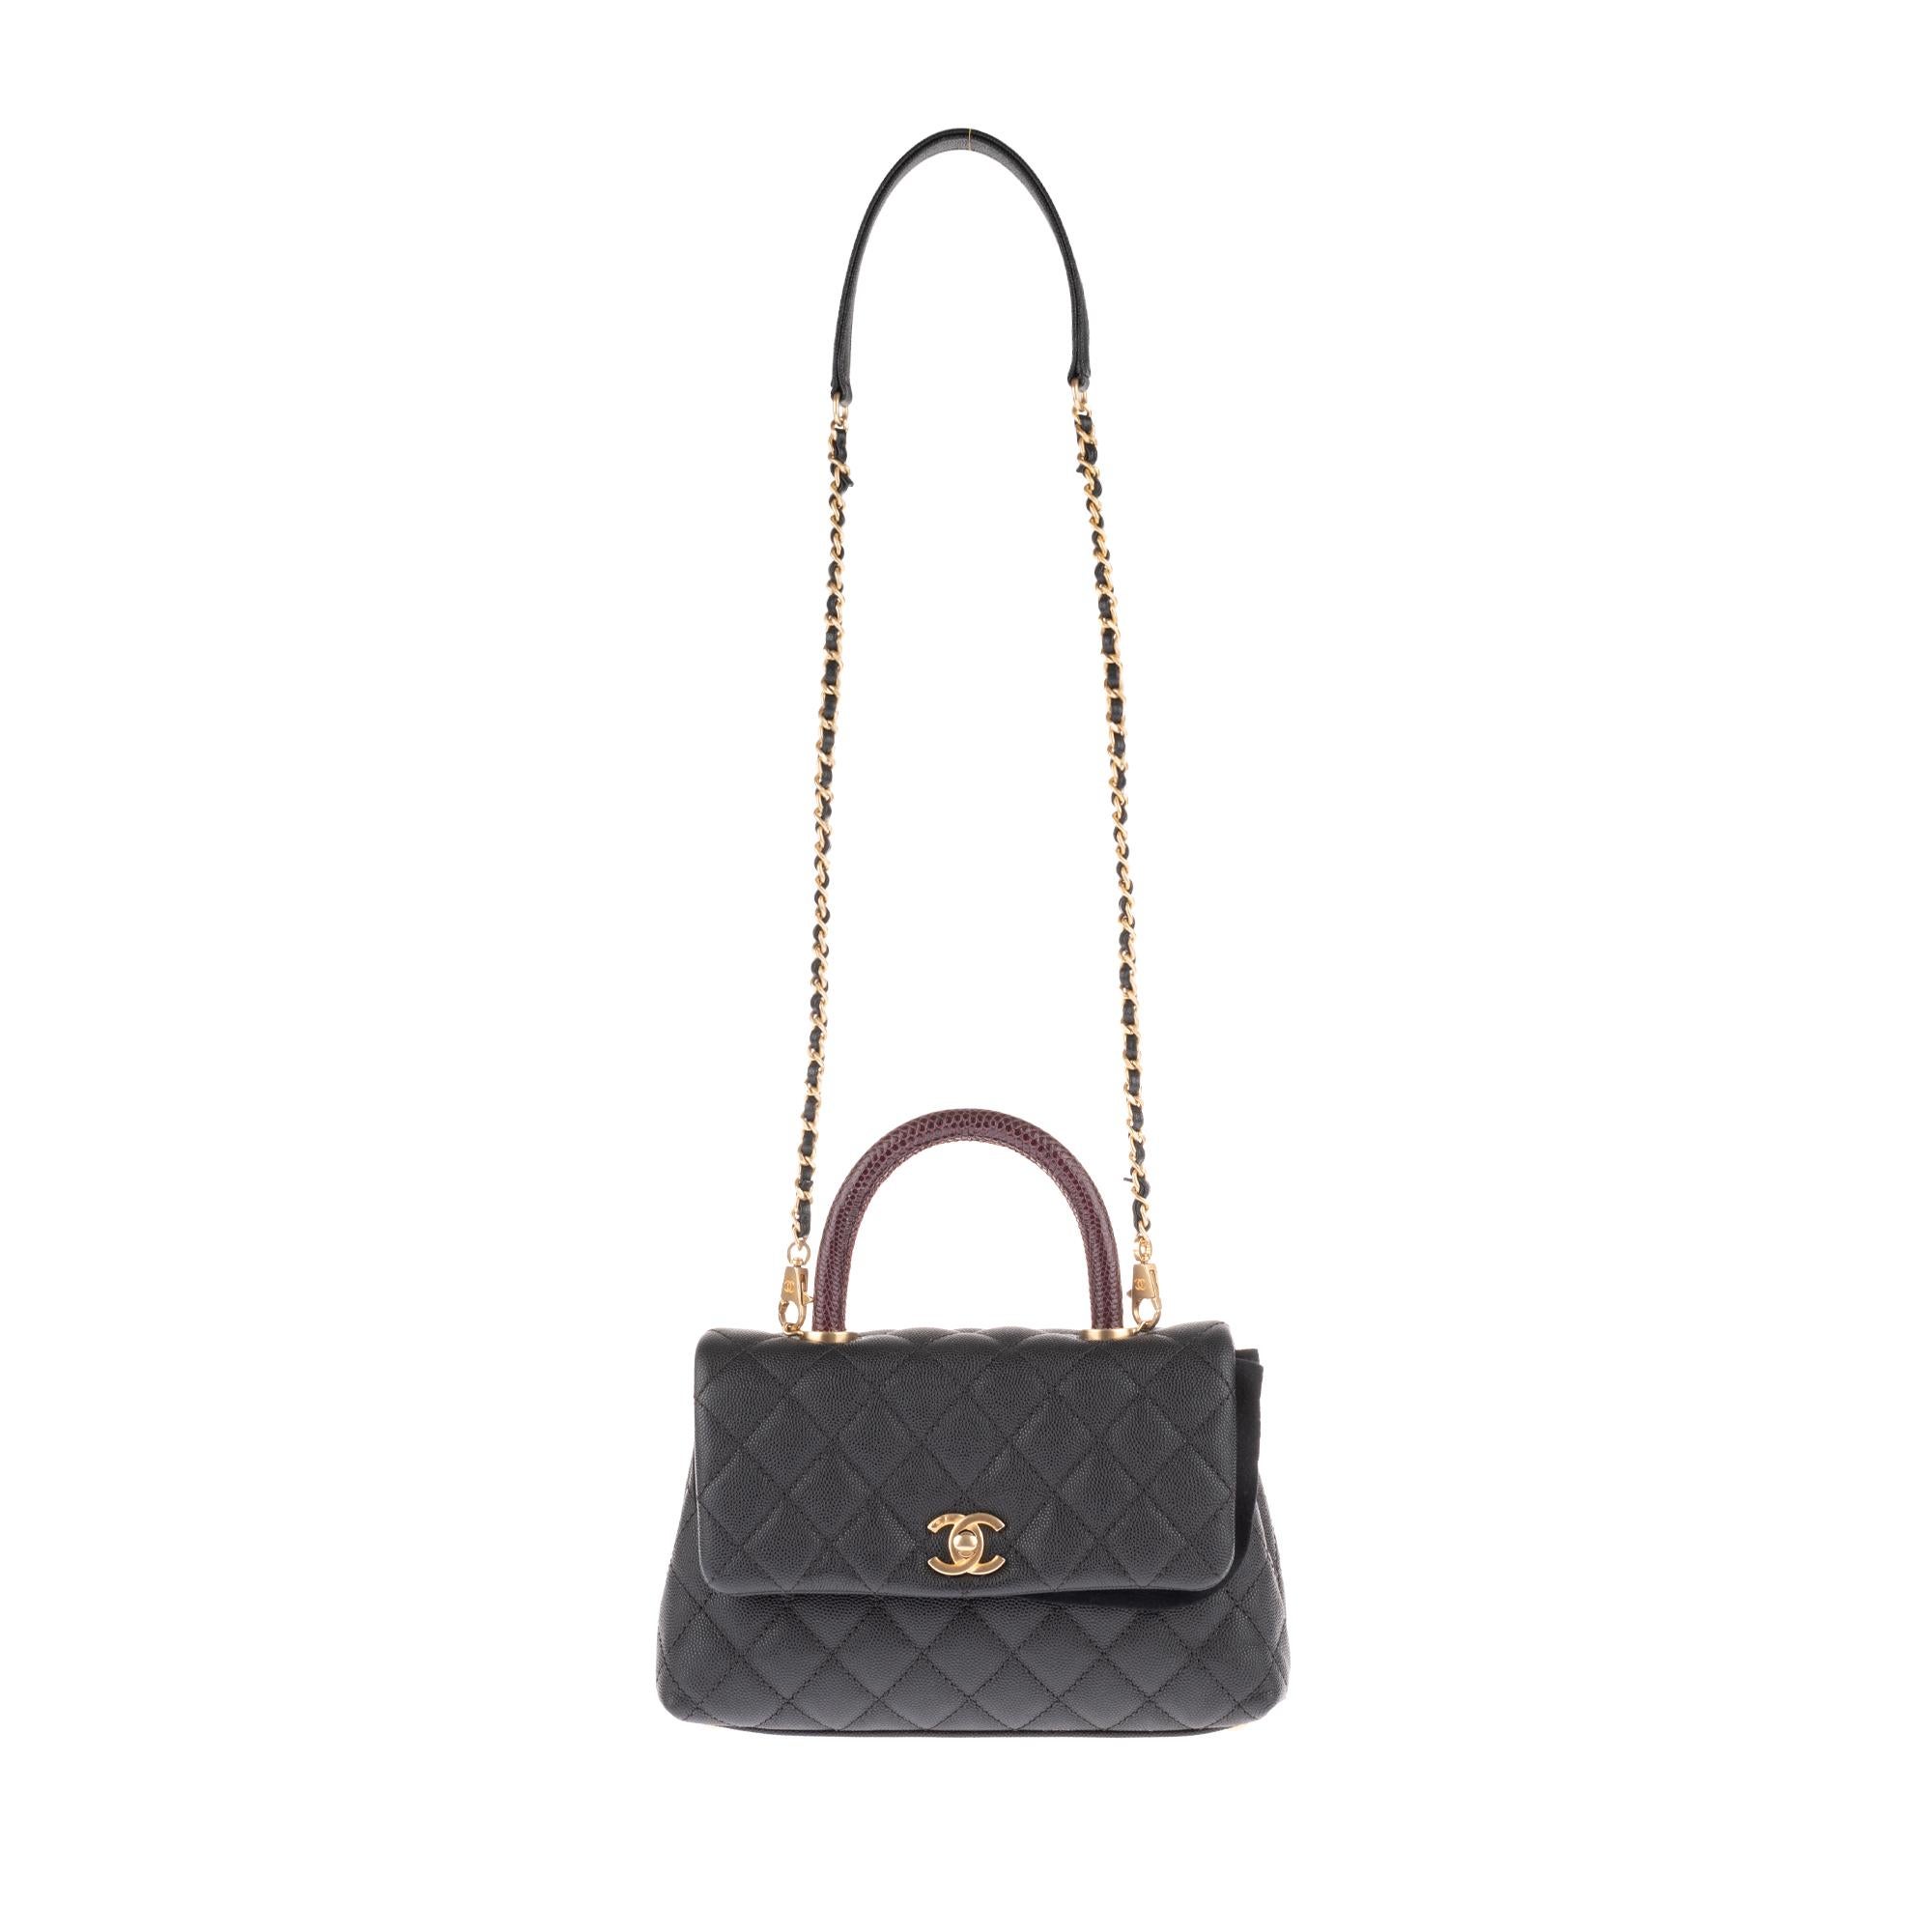 Stunning and original Chanel Coco Handle handbag in black caviar leather, gold metal trim, brown lizard handle, a gold metal chain handle interlaced with black leather allowing a handheld or shoulder or shoulder strap.

Closure by flap.
Black